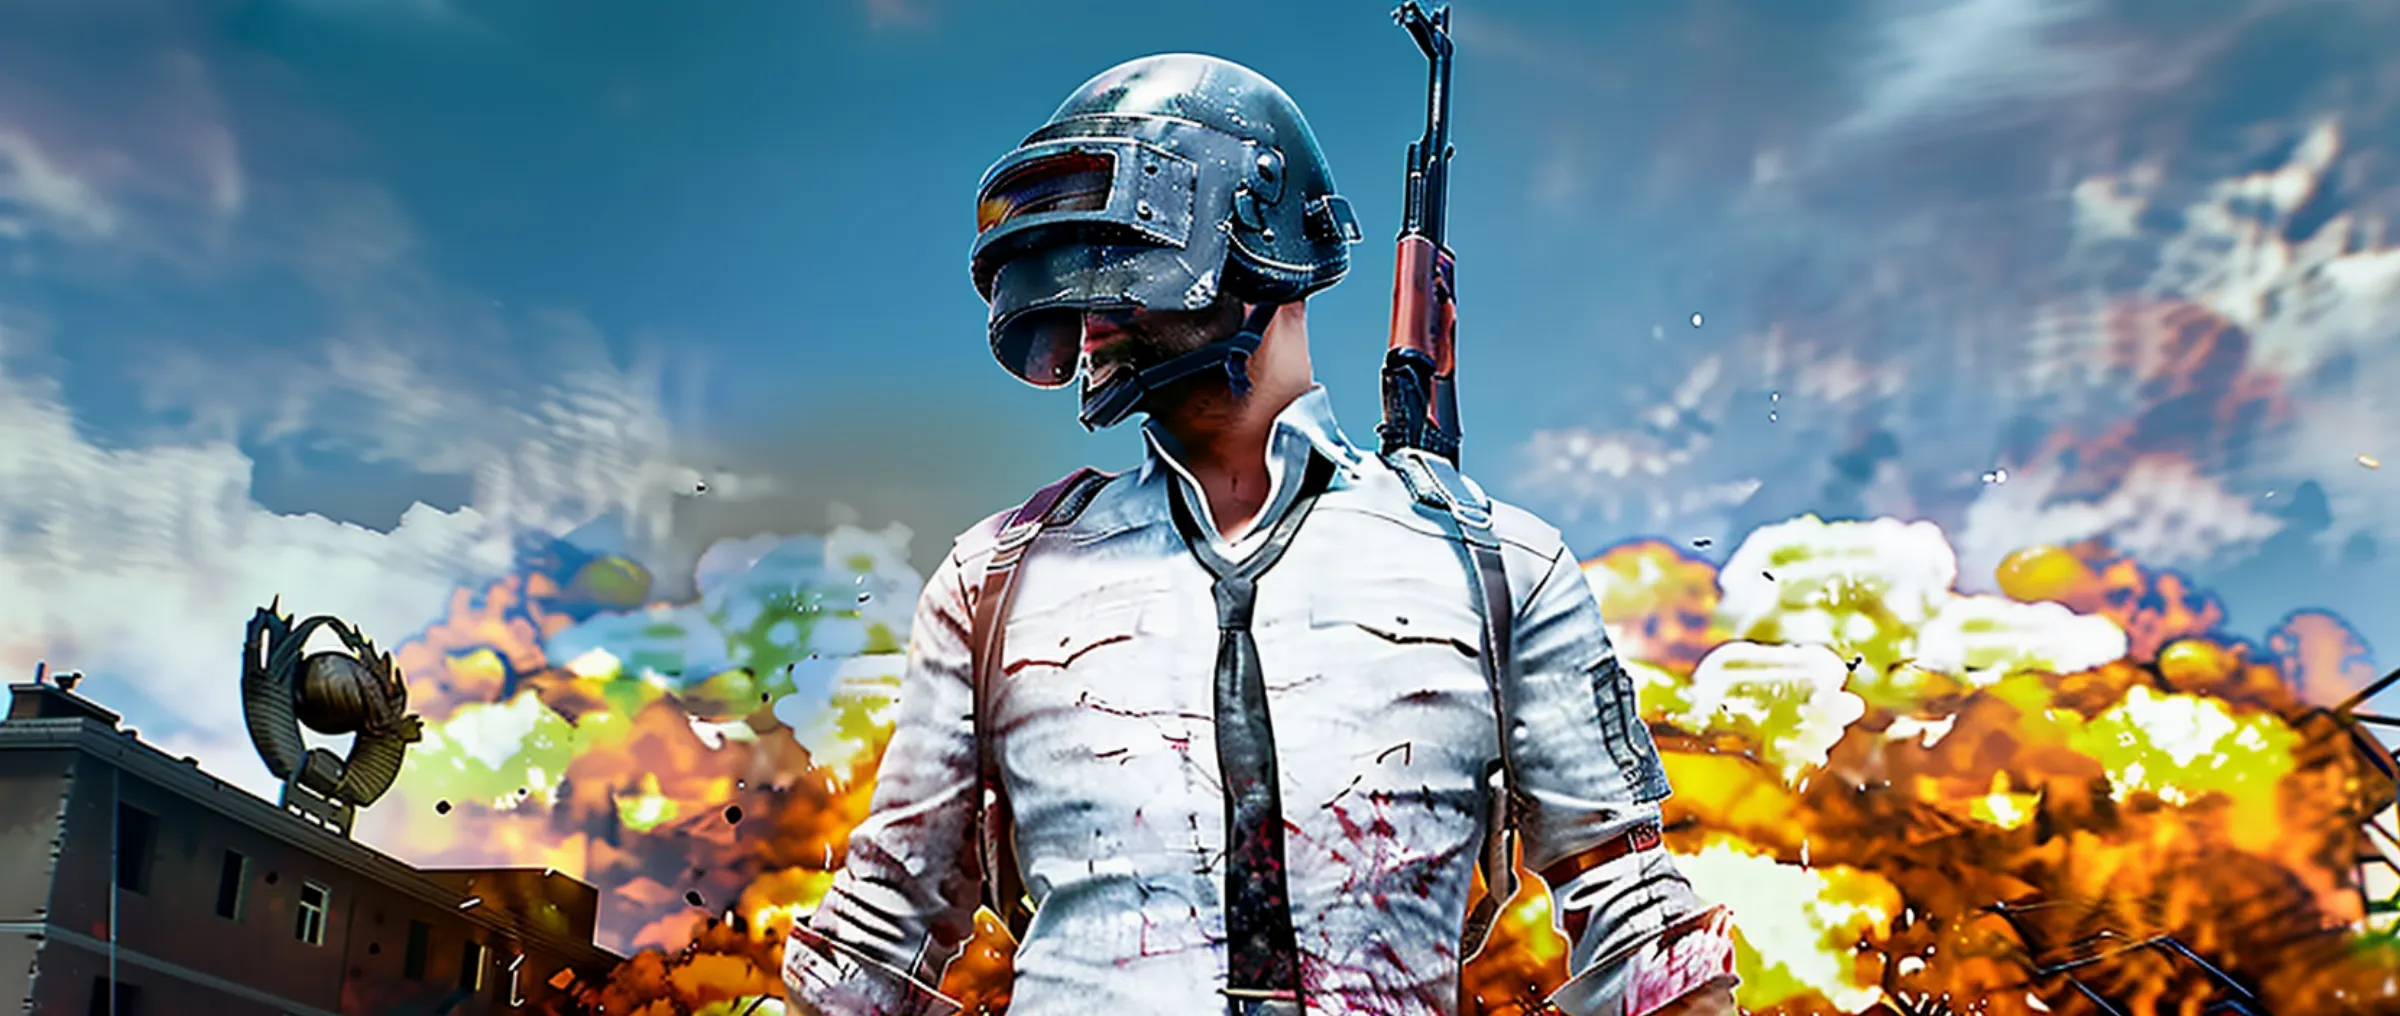 PUBG's publisher is teaming up with Circle for in-game payments on Overdare